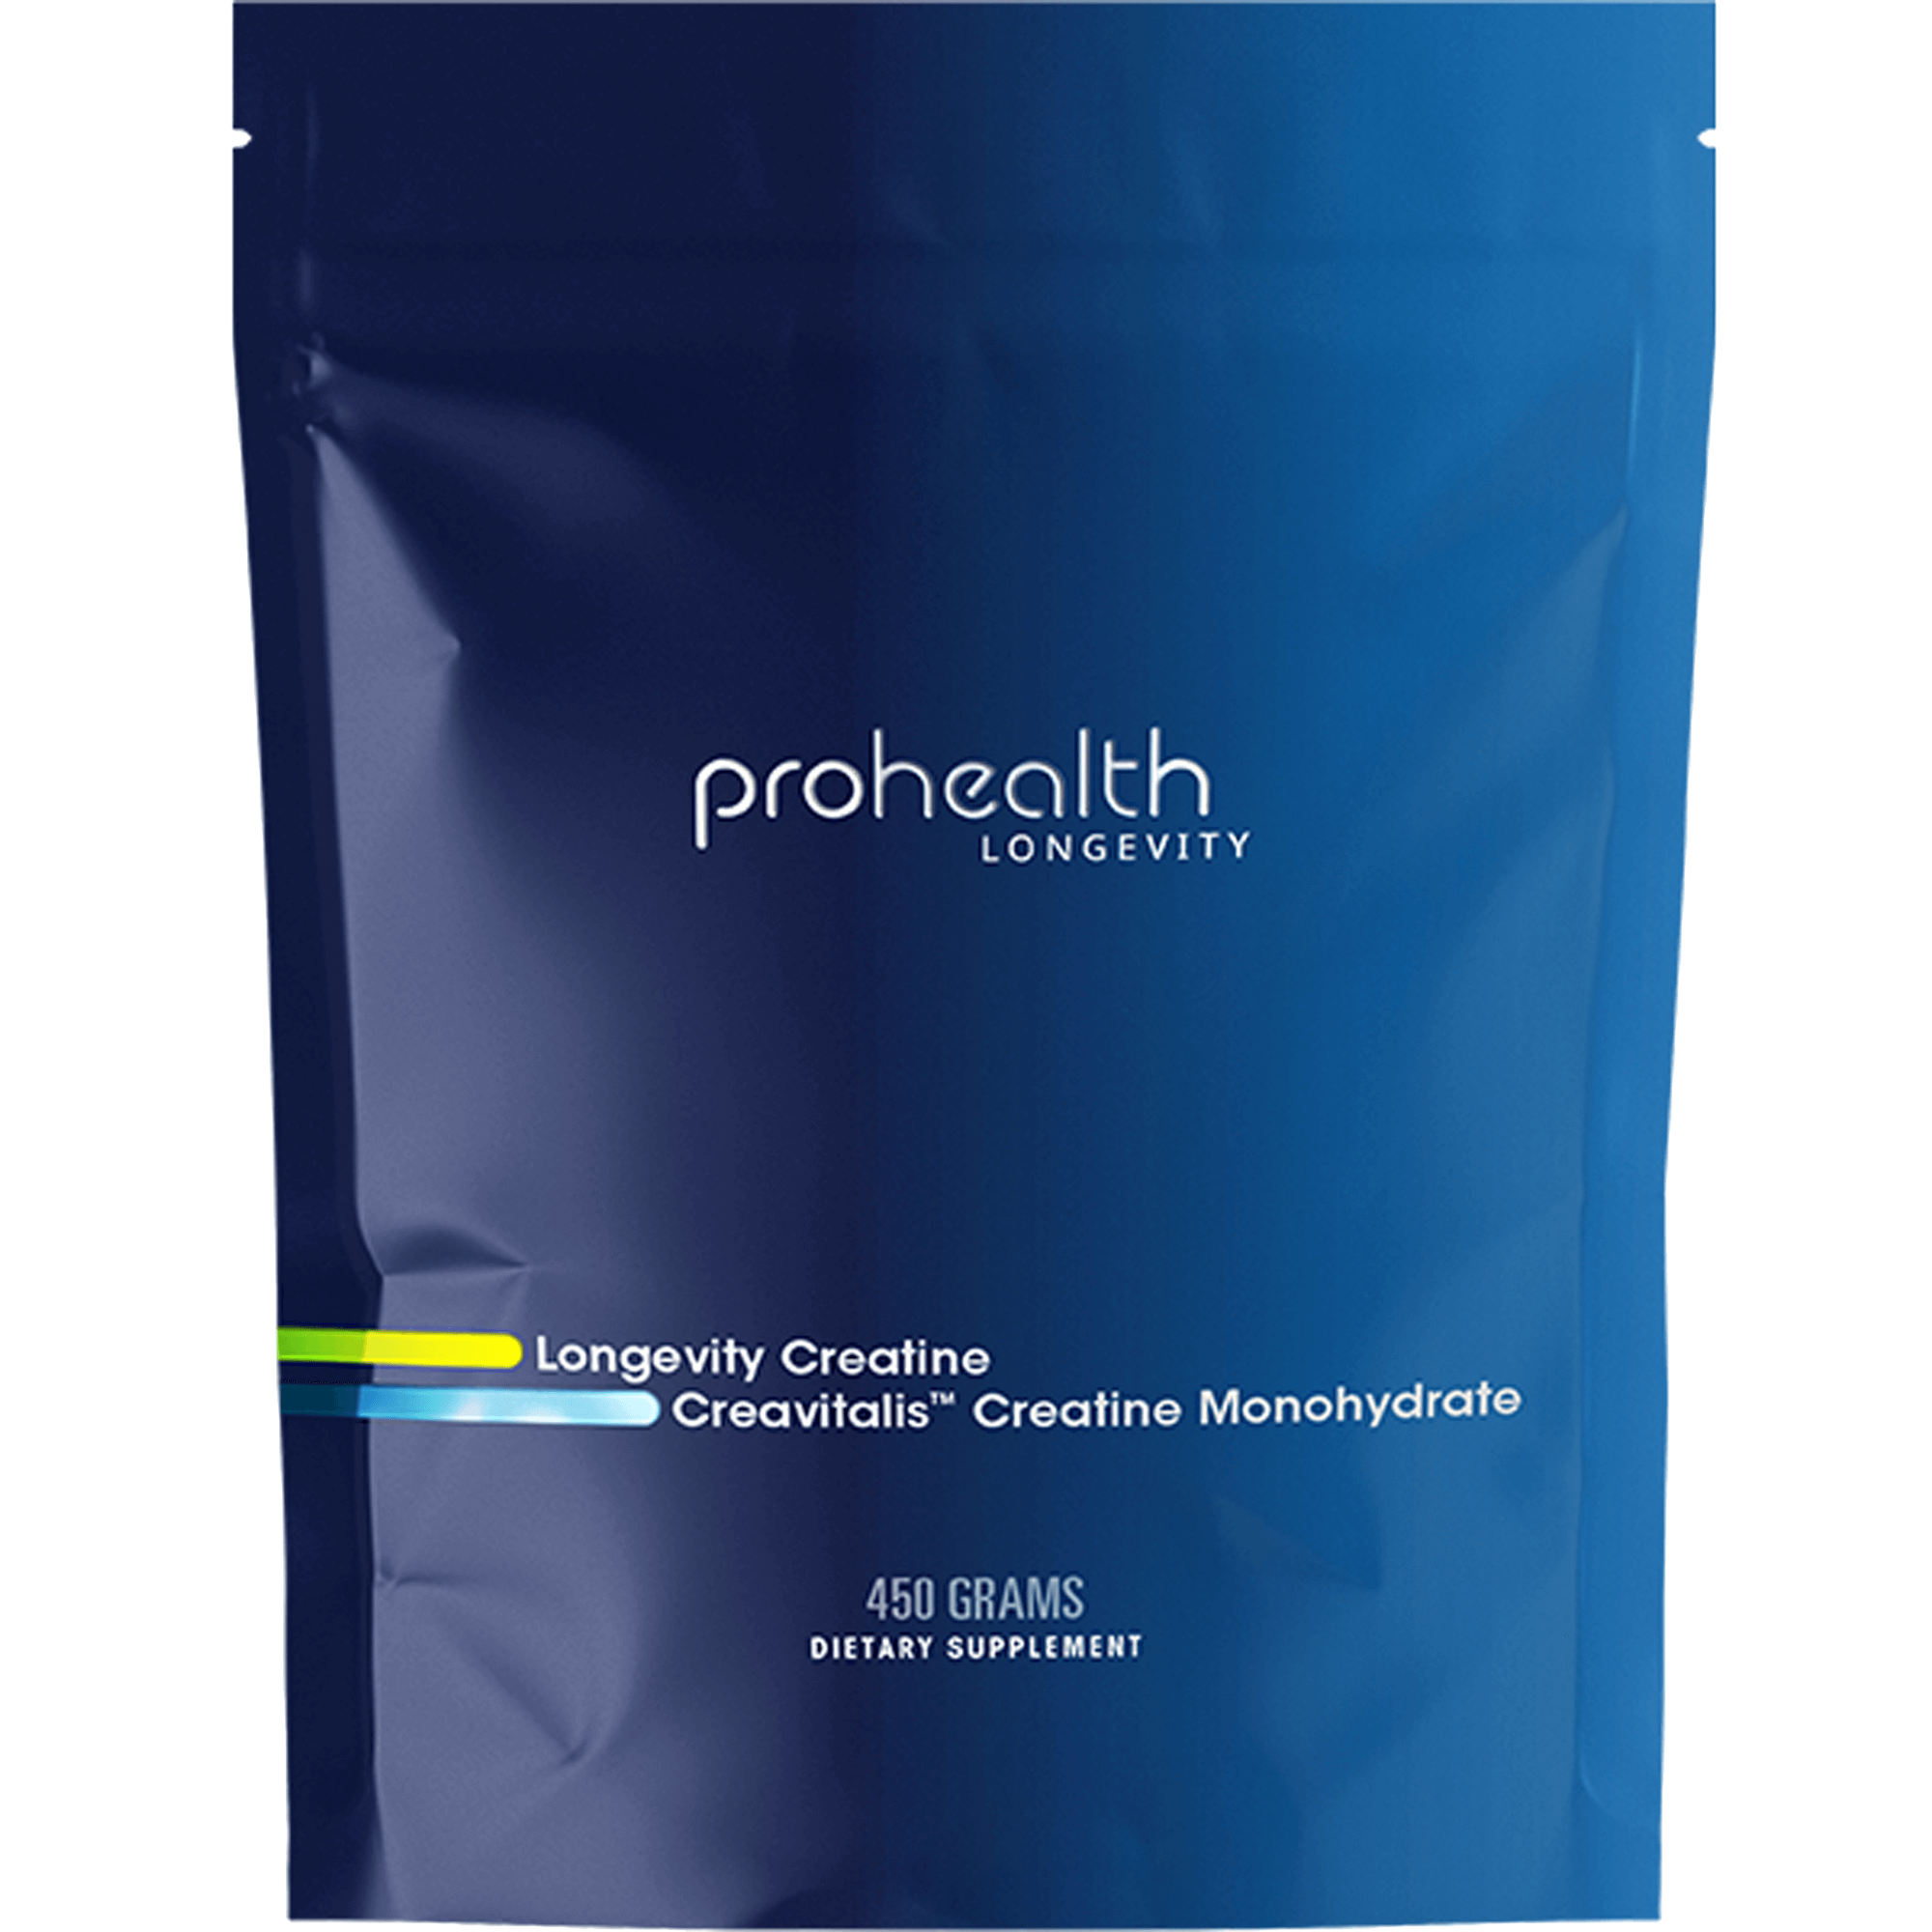 Product image of Prohealth Longevity, a blue package